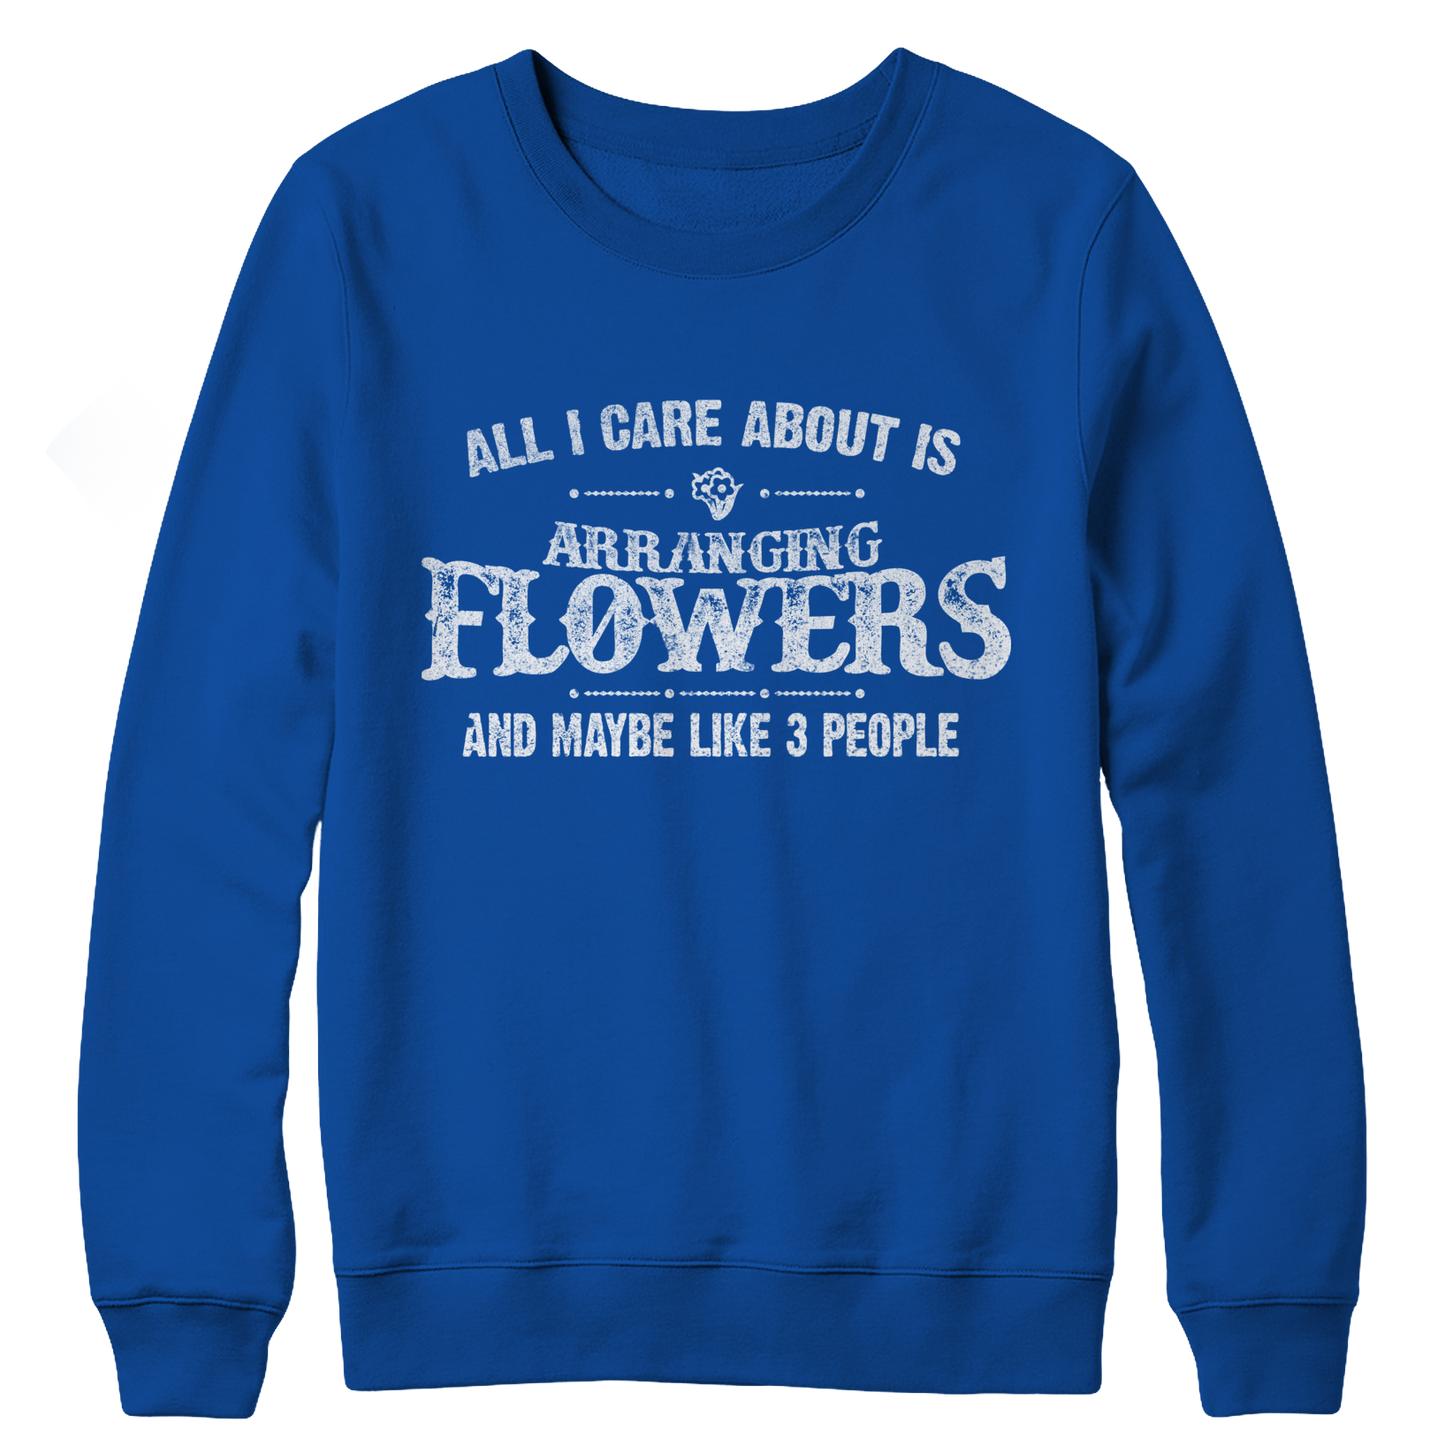 Limited Edition - All I Care About Is Arranging Flowers And Maybe Like 3 People Crewneck Fleece Sweat Shirt